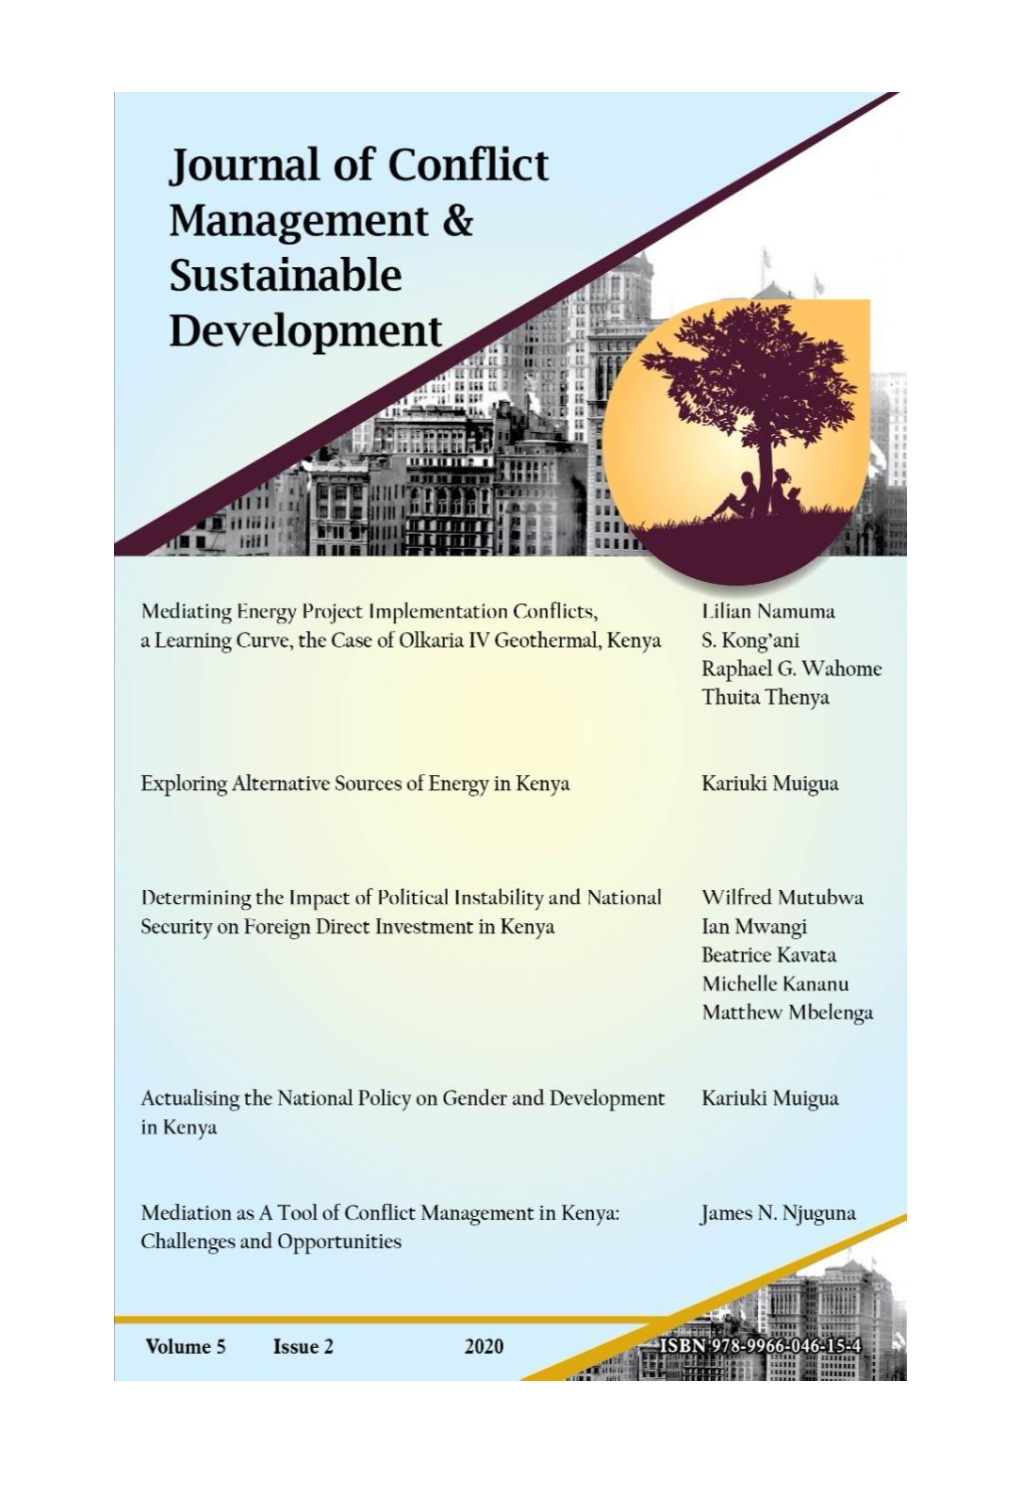 Journal of Conflict Management and Sustainable Development